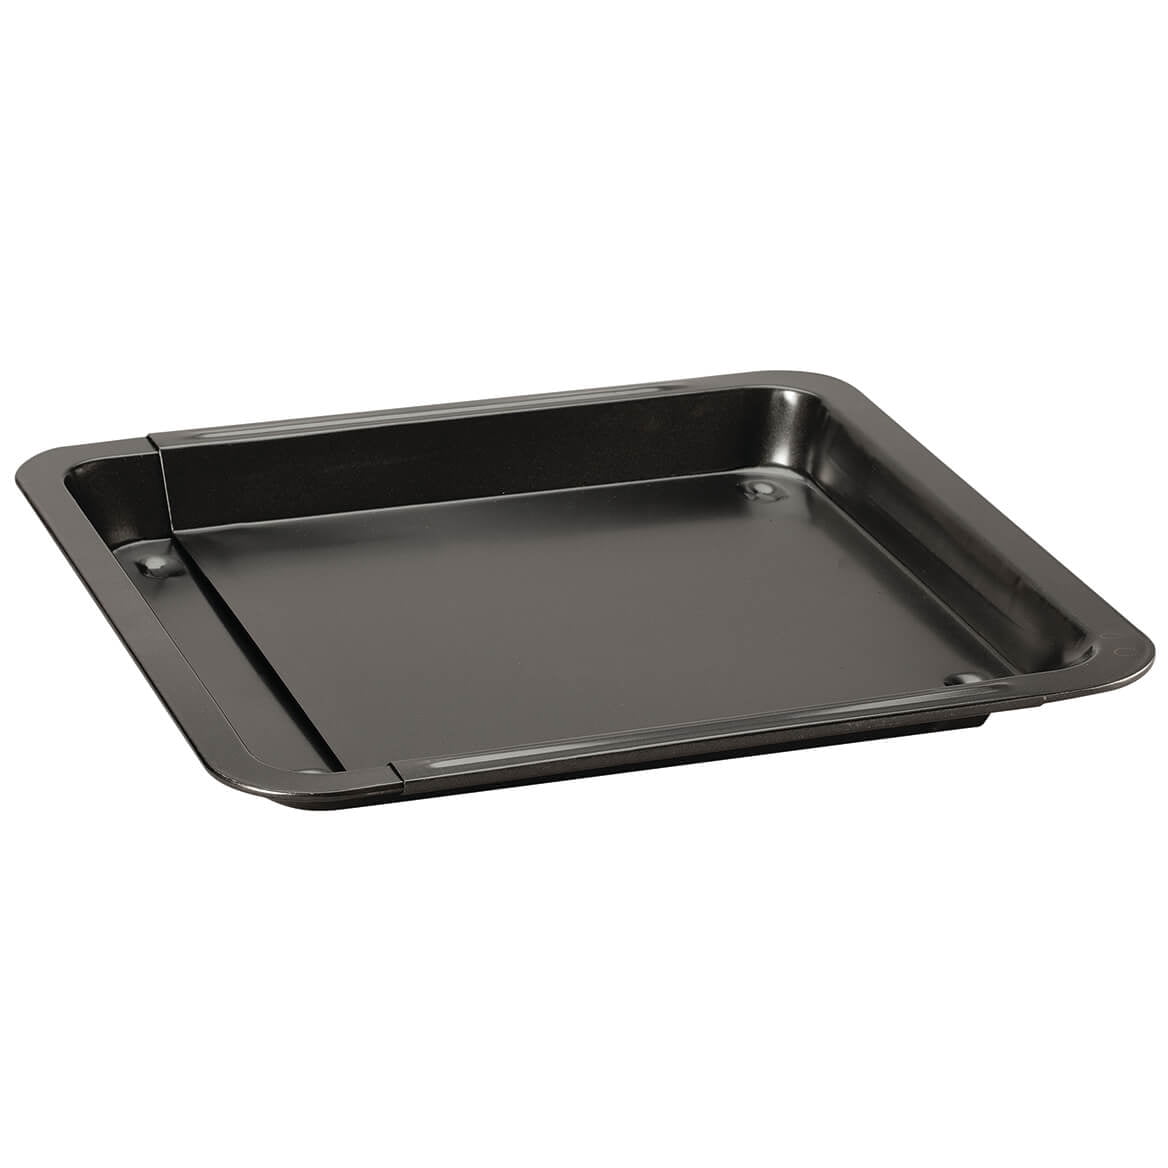 Expandable Baking Tray, Crafted With Non-Stick Carbon Steel, Extendable  Design, Kitchen Gadgets - Measures 13 Wide x 1 High and Extends 12-21  1/2 Long, by Home Marketplace 